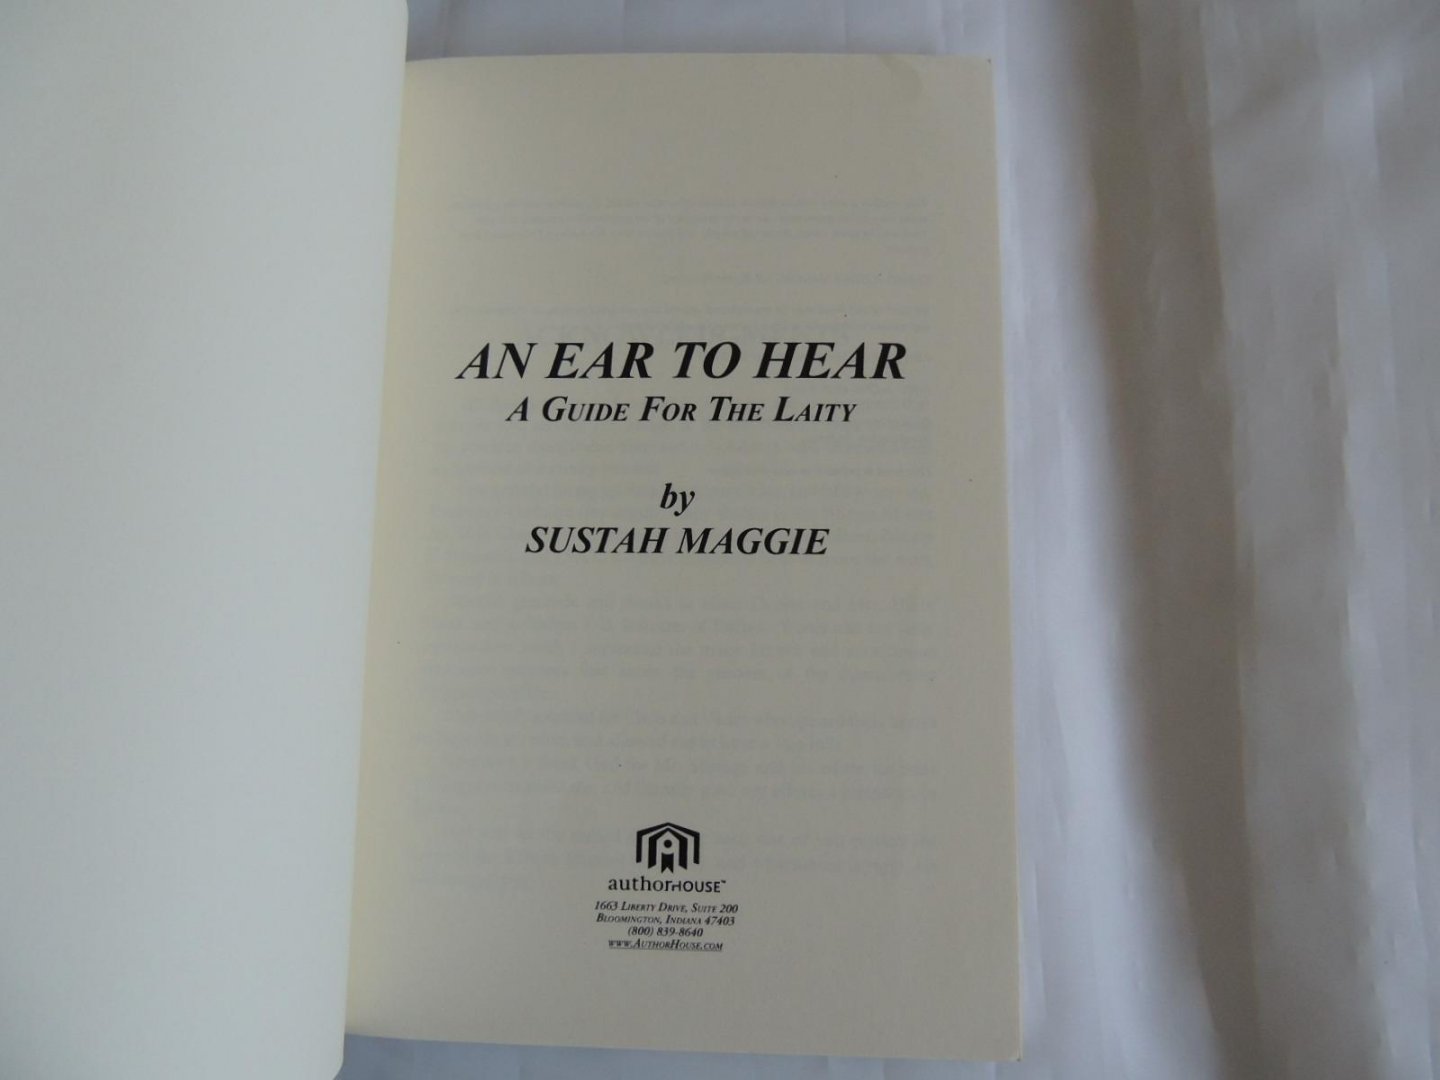 Maggie Sustah - An Ear to Hear - a guide to the laity